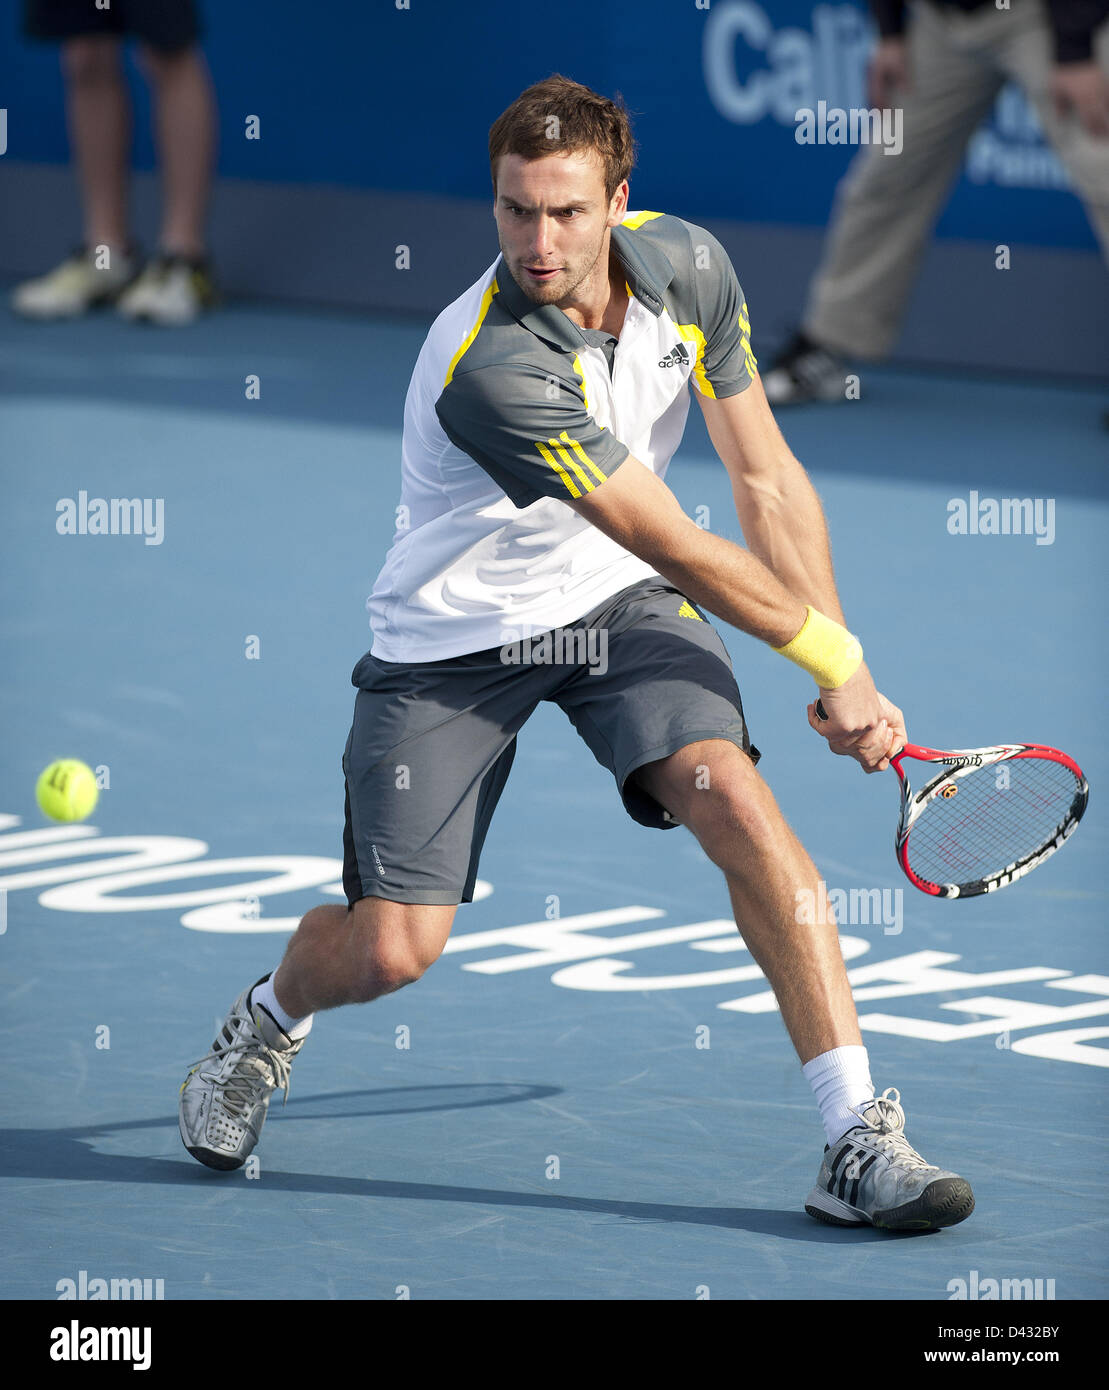 March 2, 2013 - Delray Beach, Florida, U.S. -  ERNESTS GULBIS (LAT) In action against former champion T. Haas (GER) at the Delray Beach International Tennis Championships (ITC) an ATP World Tour 250 series men's tennis tournament. Gulbis won 6-3, 4-6, 7-6(2) and awaits to see who his opponent will be in the finals. (Credit Image: © Andrew Patron/ZUMAPRESS.com) Stock Photo